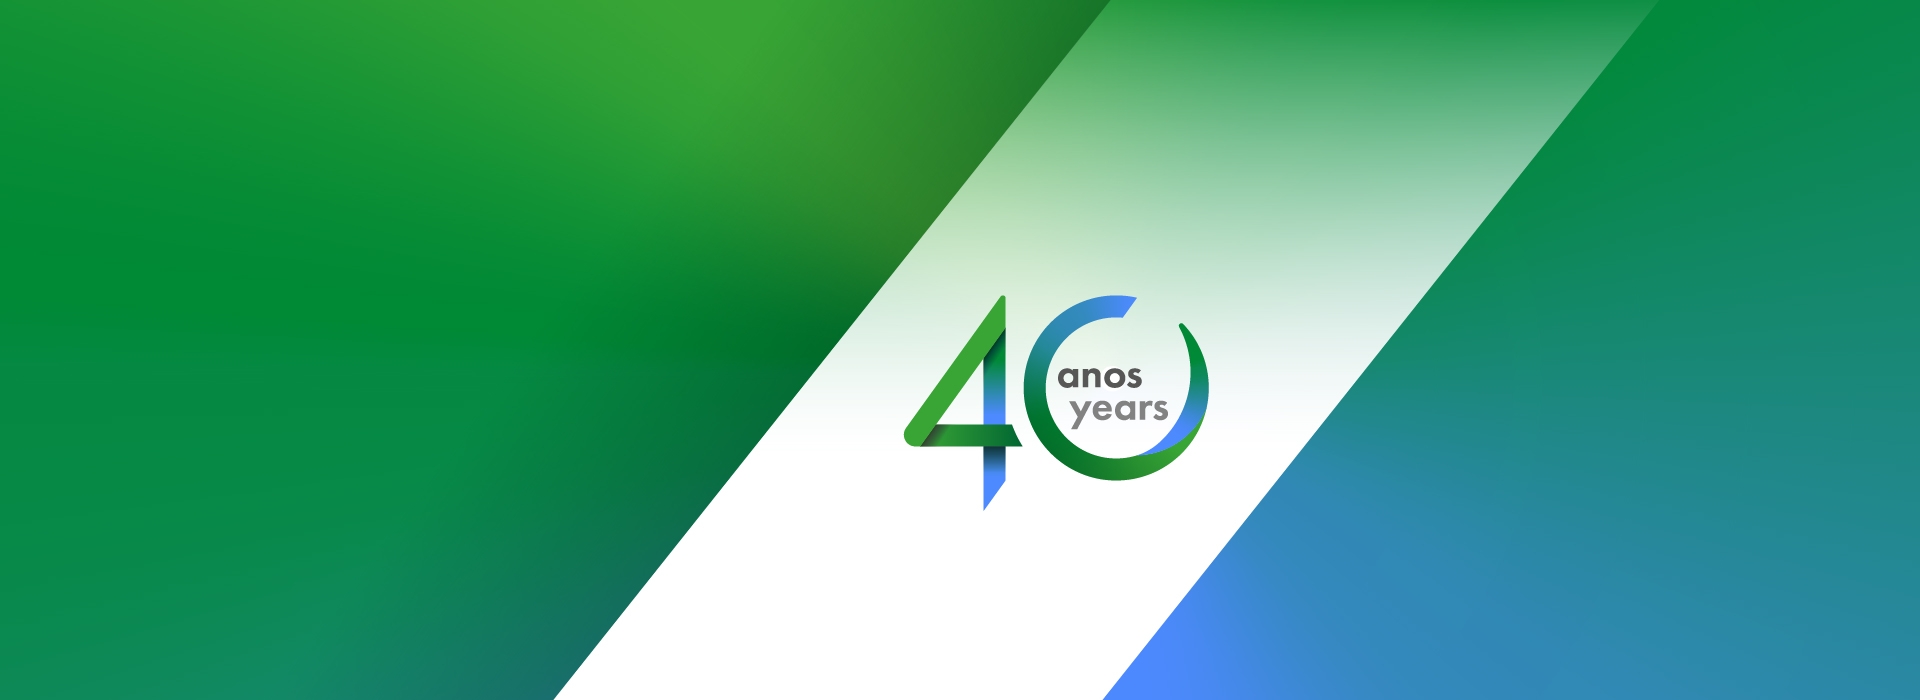 Homepage - 40 anos